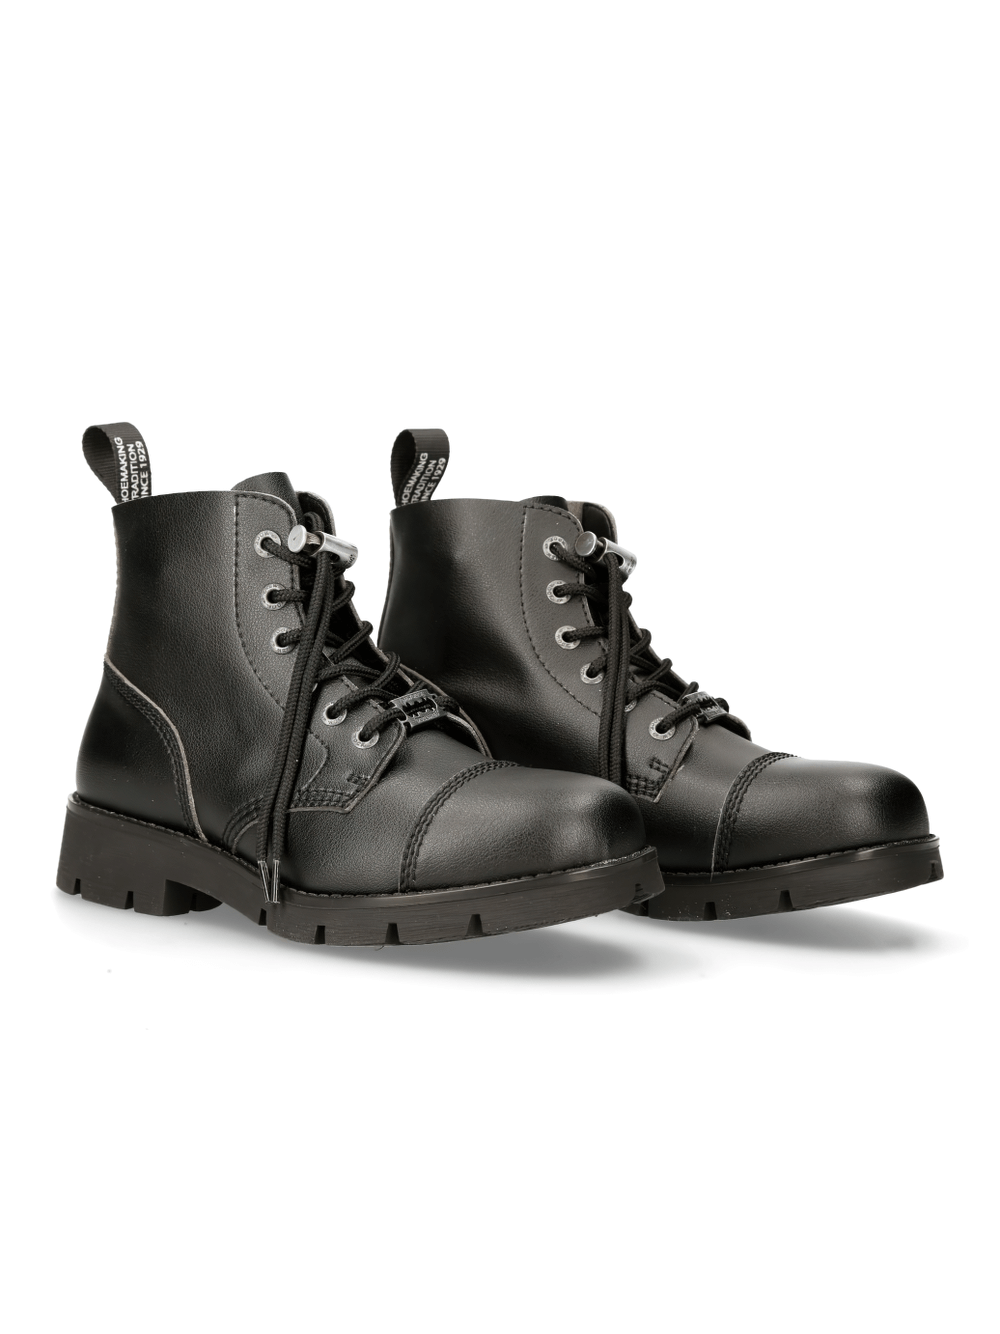 NEW ROCK Urban Black Ranger Lace-Up Ankle Boots